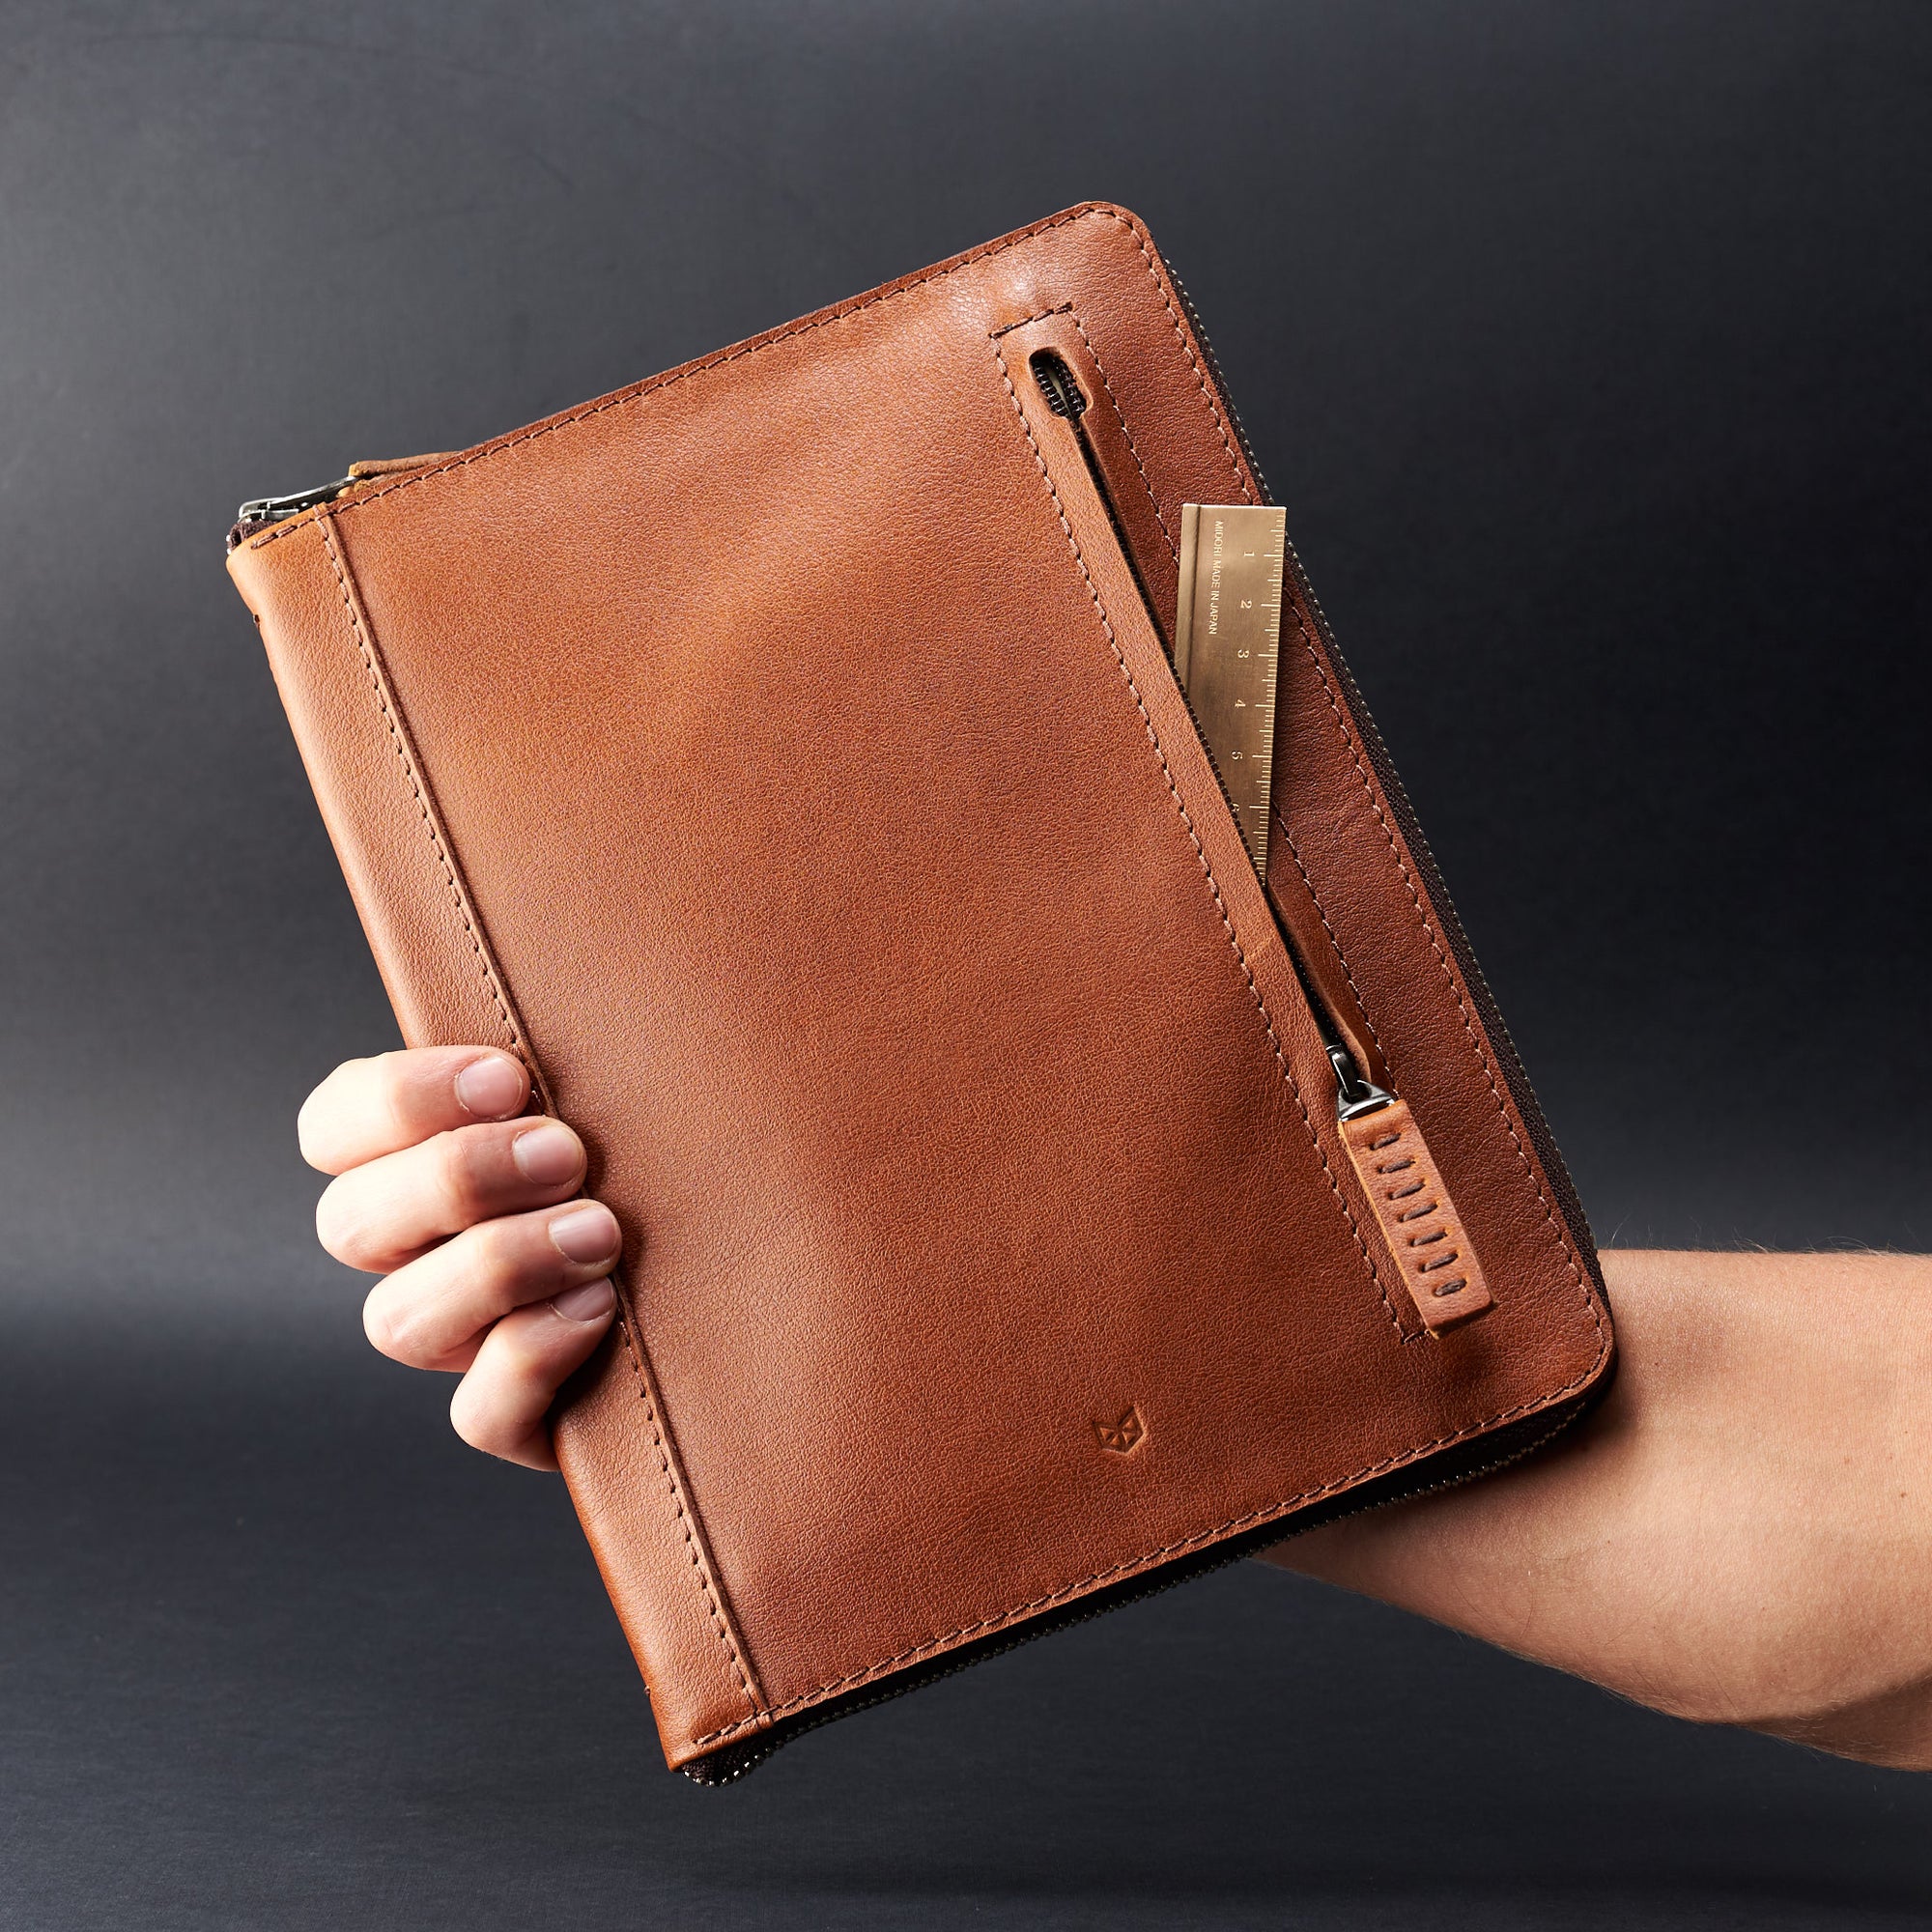 Holding hand. A5 leather notebook cover by Capra Leather. Gifts for artists.